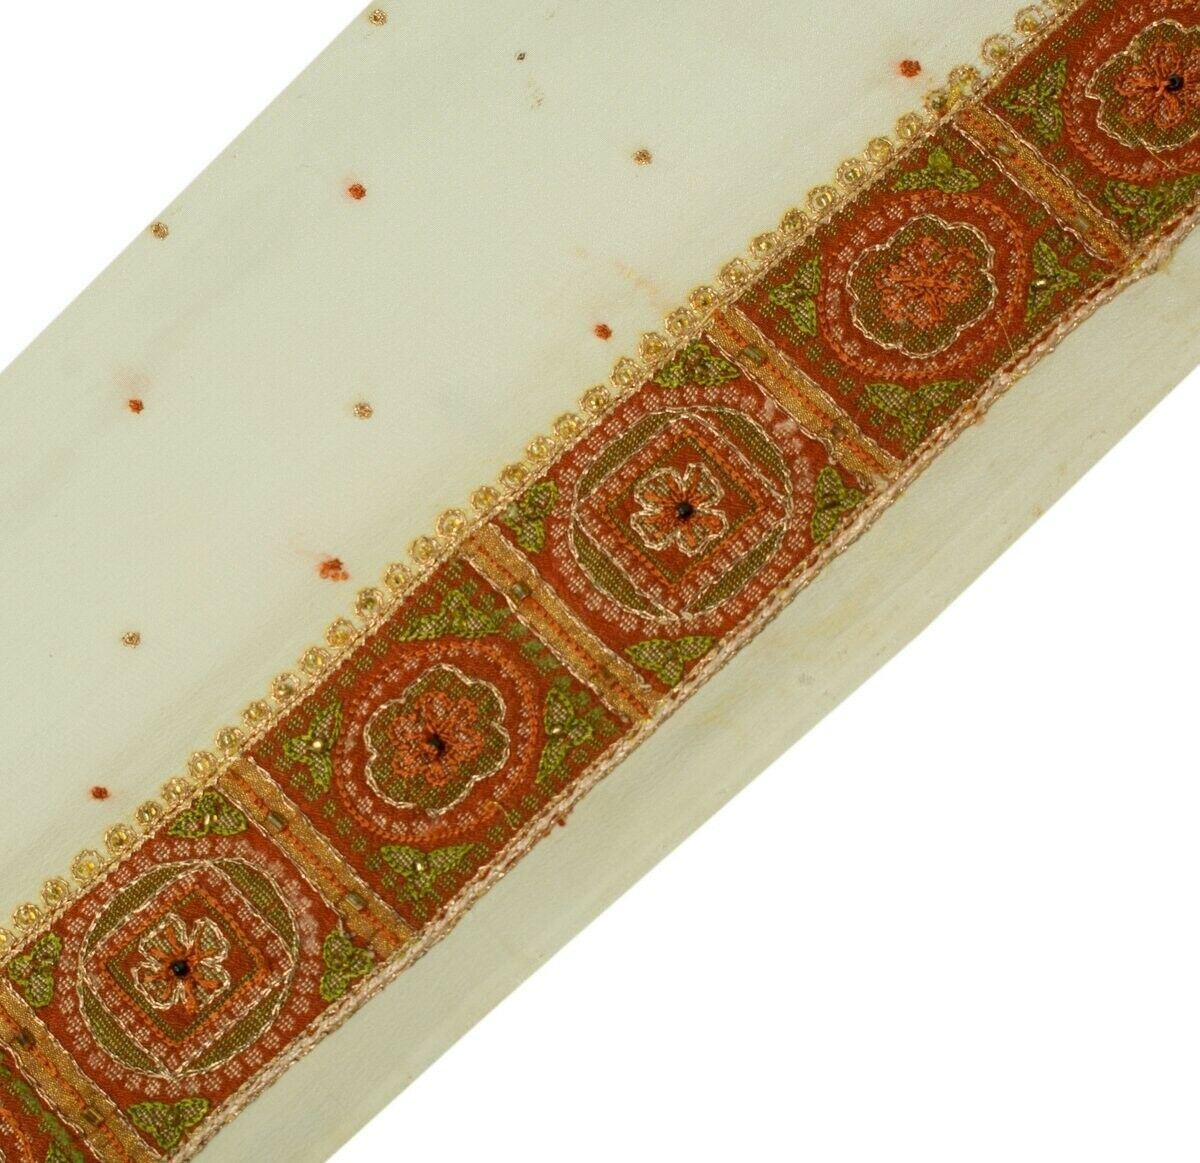 Vintage Sari Border Indian Craft Sewing Trim Woven Embroidered Ribbon Rust Lace